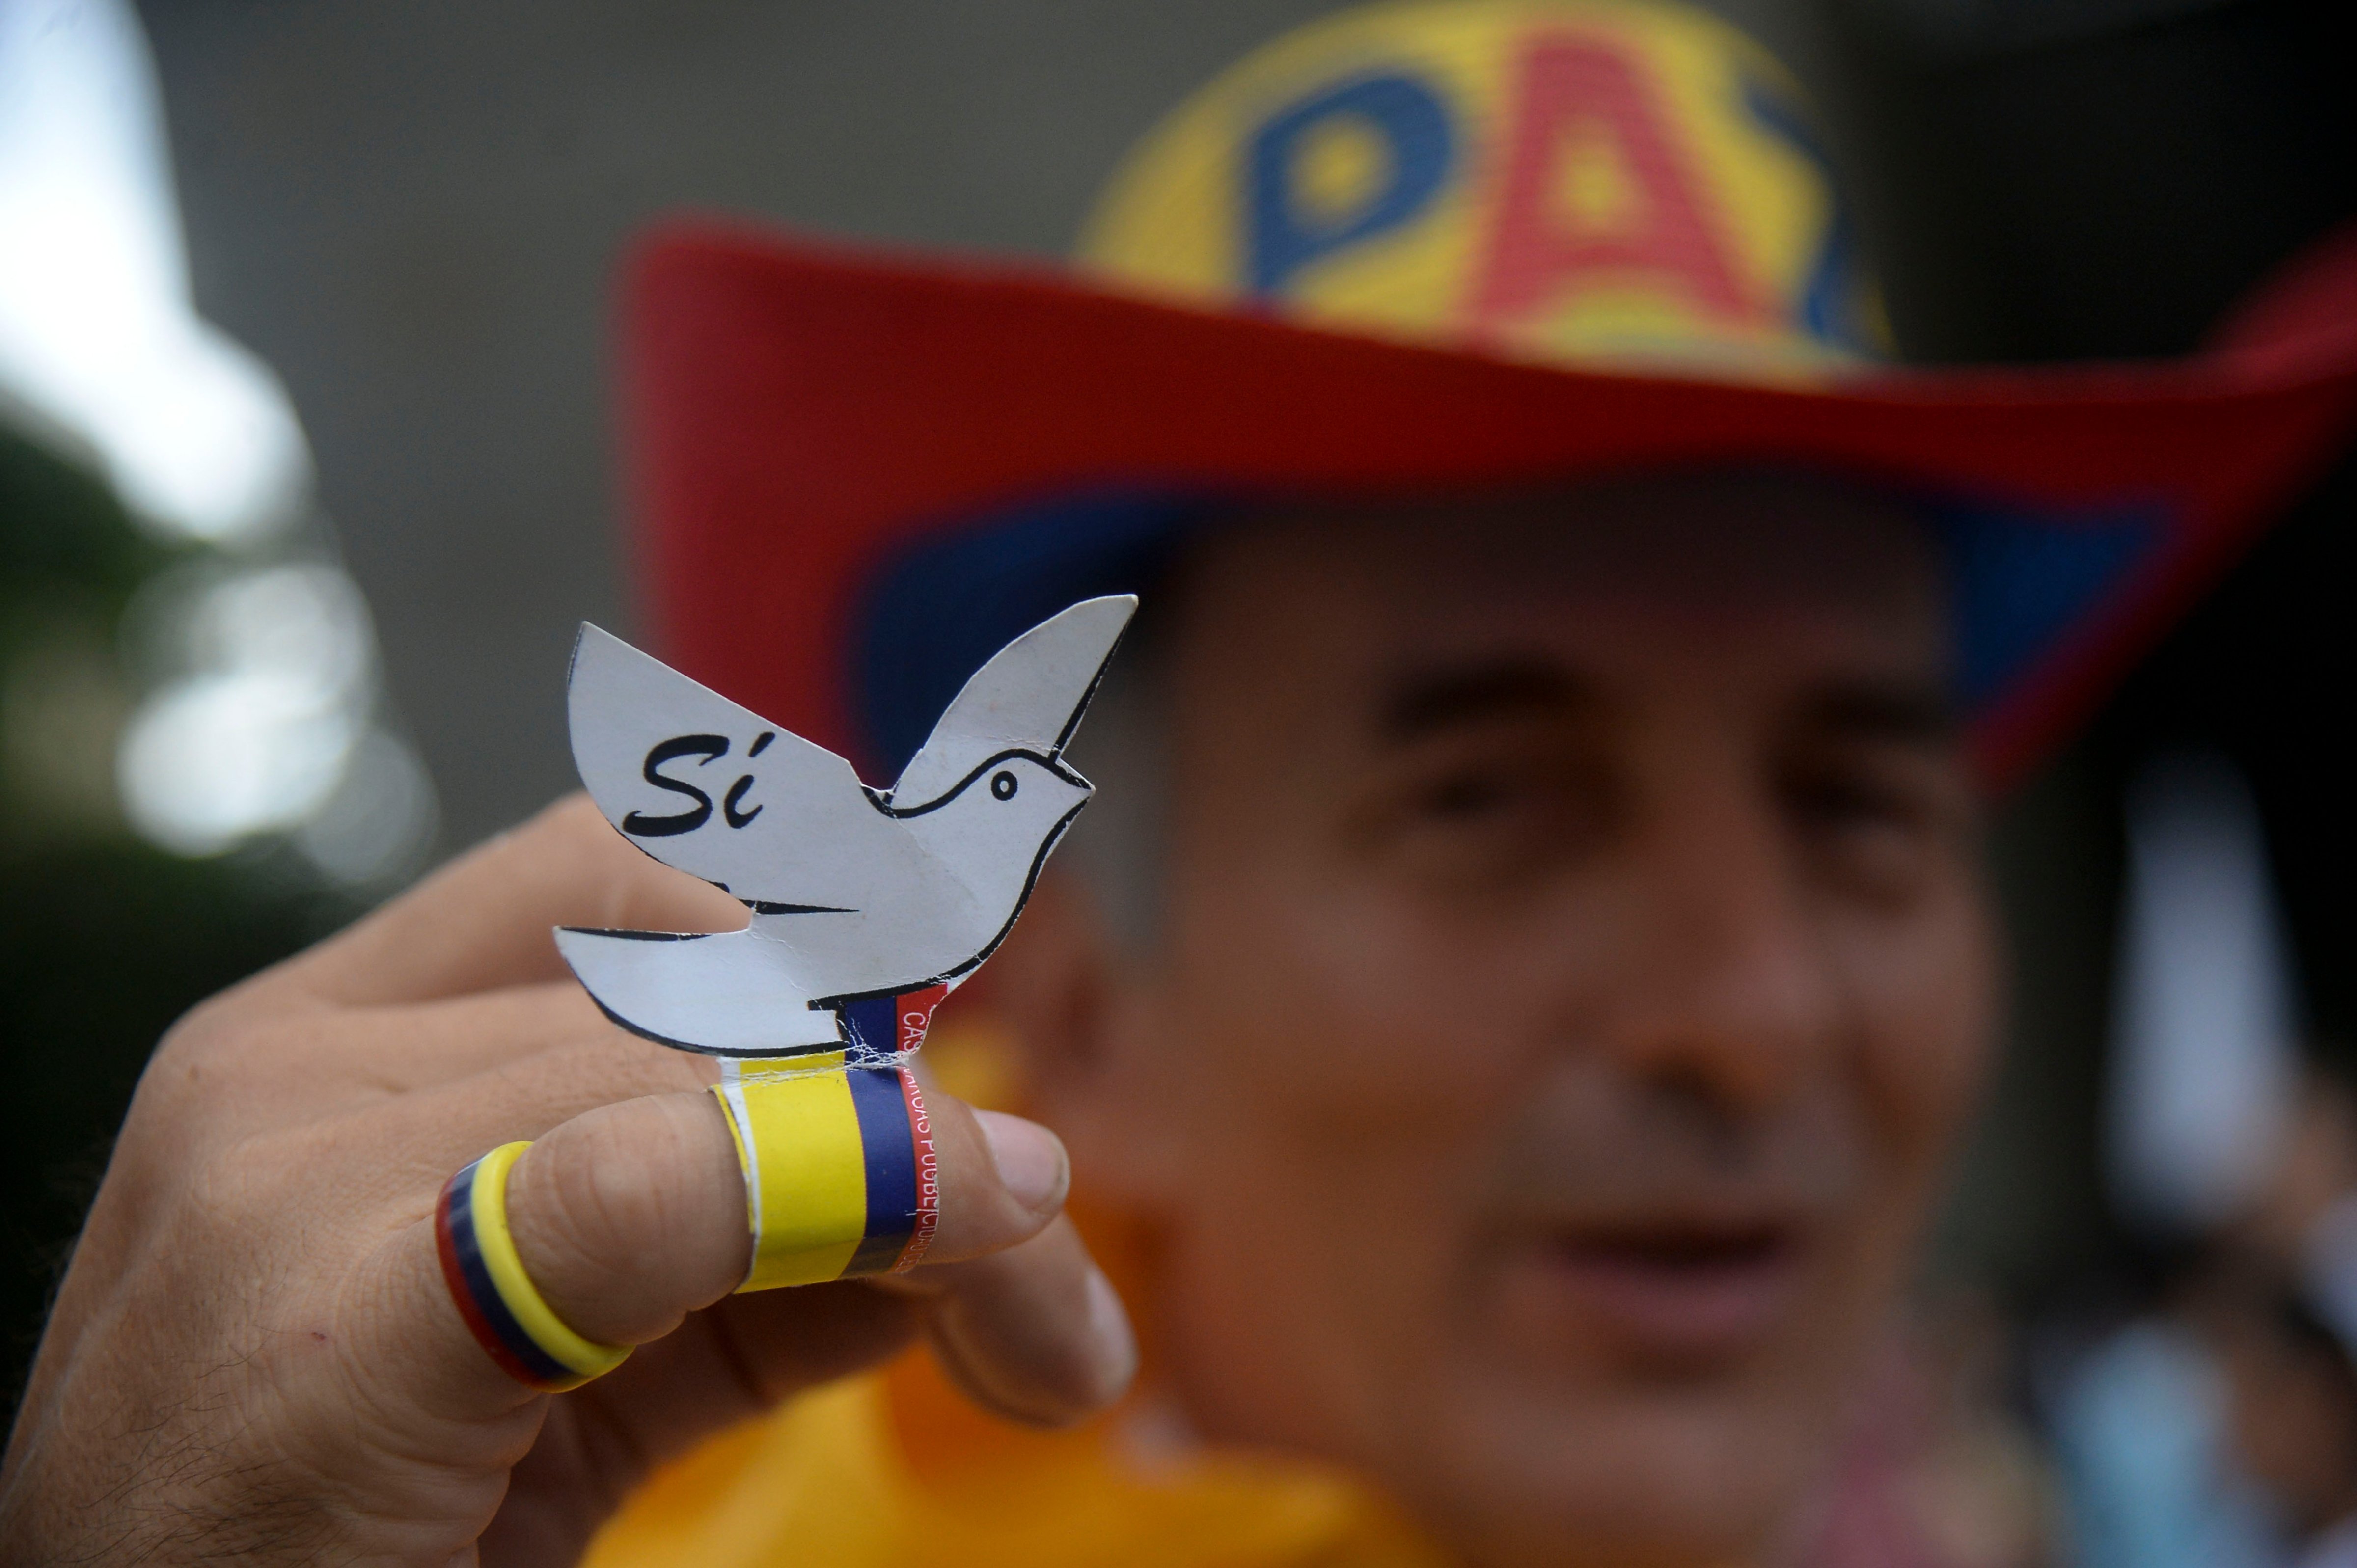 Picture taken during a march for peace through the streets of Medellin, Colombia, on October 7, 2016 just days after voters shot down a historic peace accord between the government and the Revolutionary Armed Forces of Colombia (FARC) to end the war. (RAUL ARBOLEDA&mdash;AFP/Getty Images)